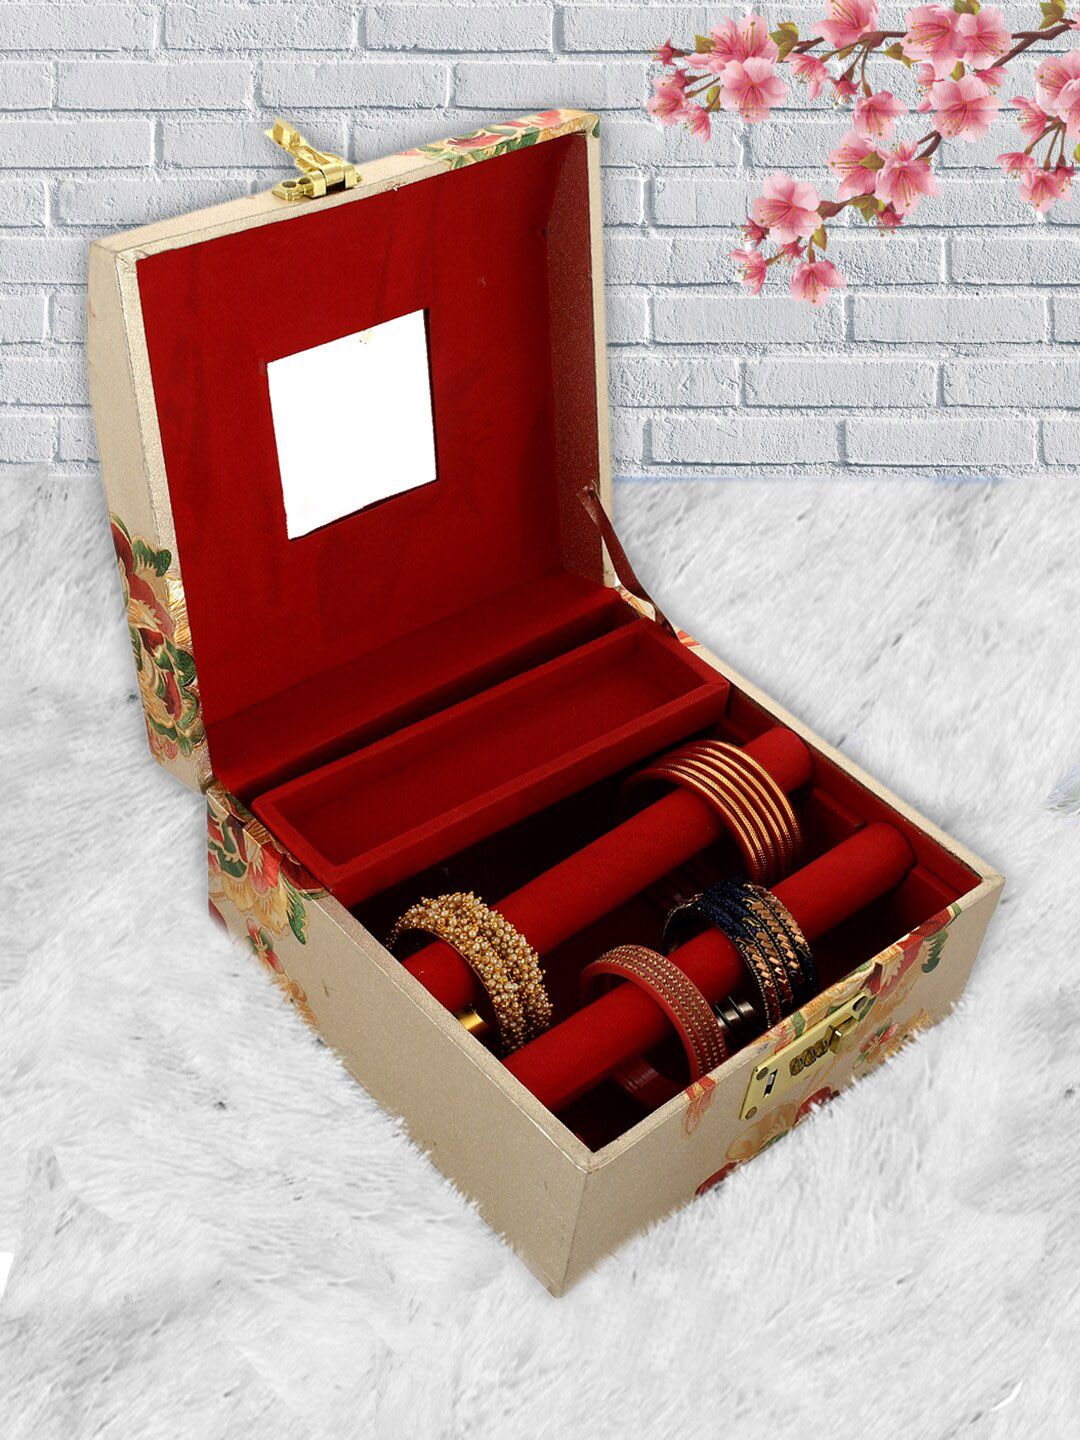 Kuber Industries Gold-Toned & Red Printed Wooden Bangle Storage Box With Number Lock System Price in India